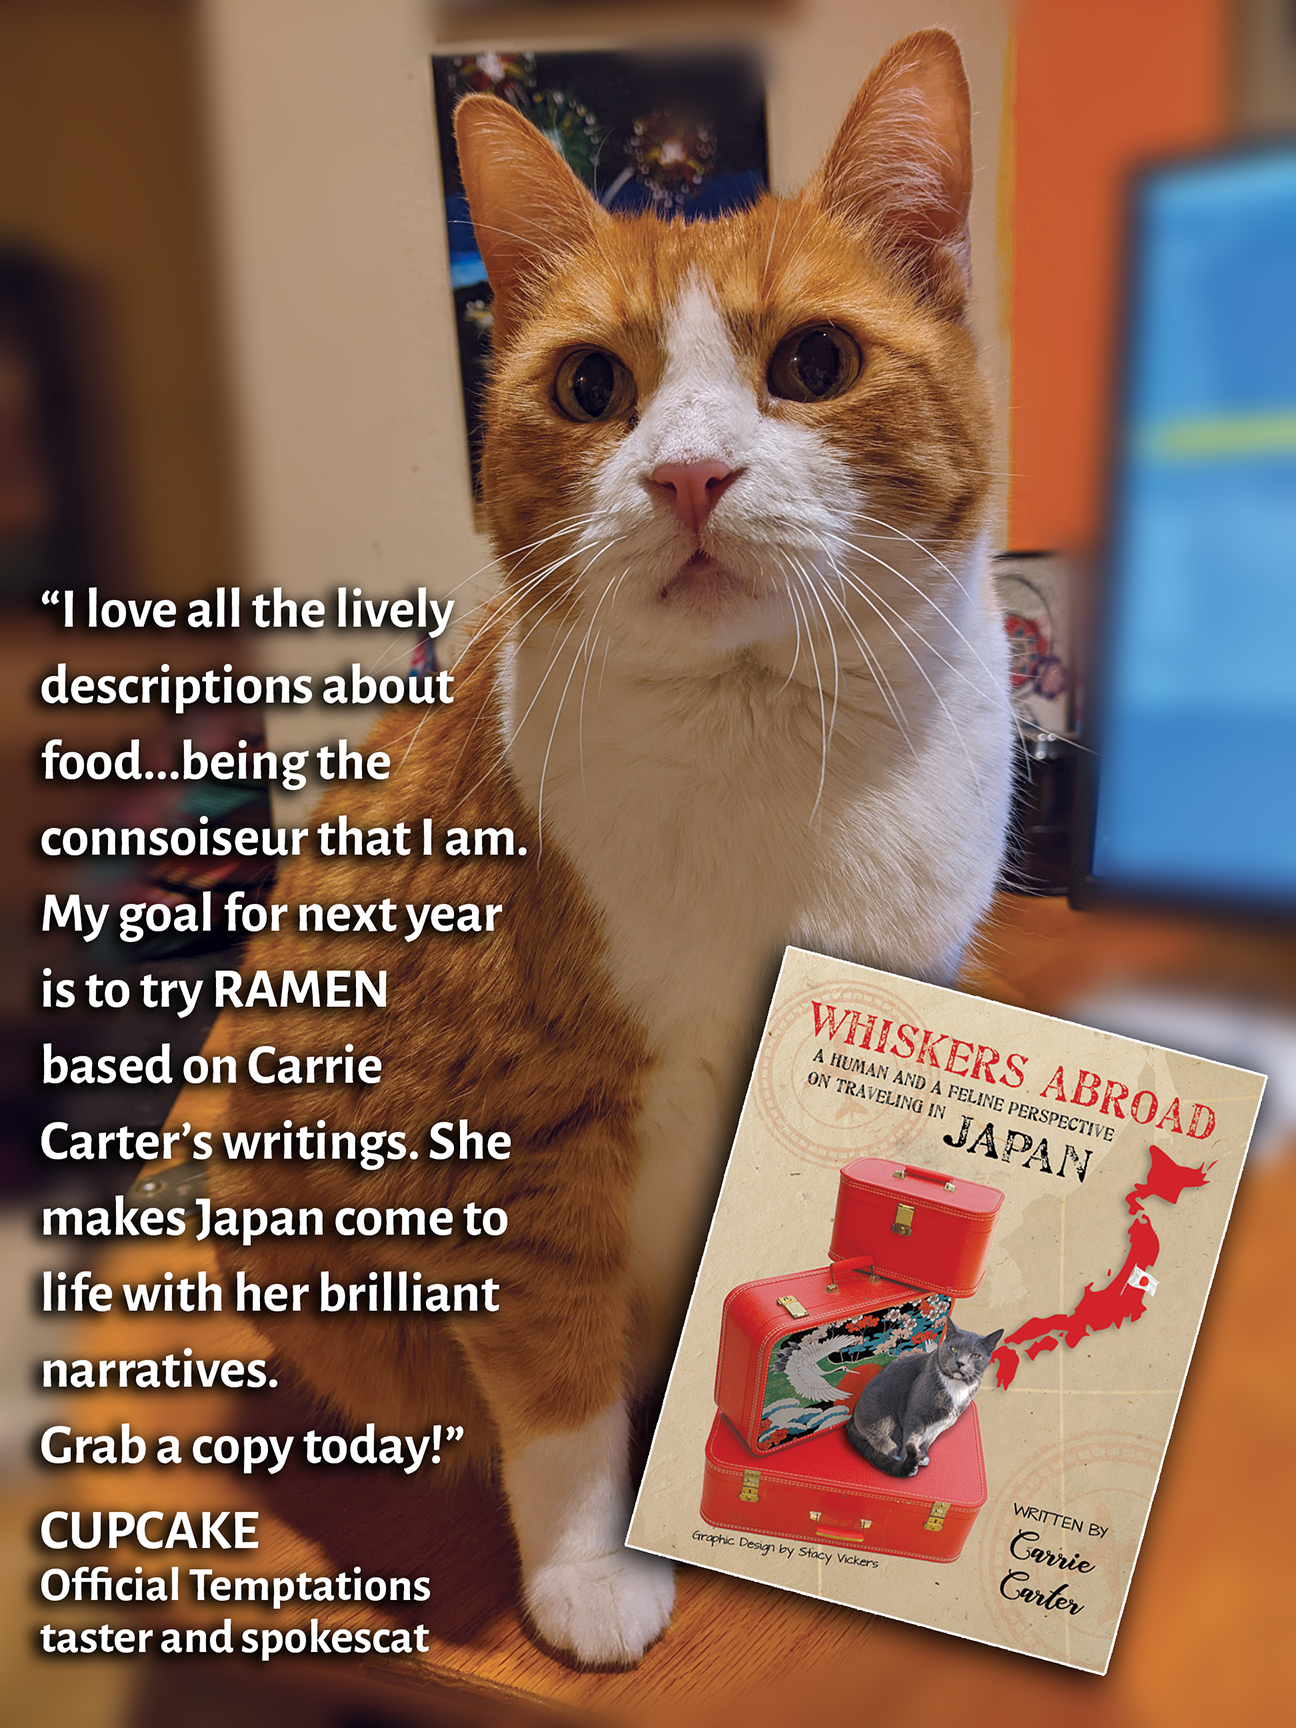 Cat leaves a positive review for Whiskers Abroad